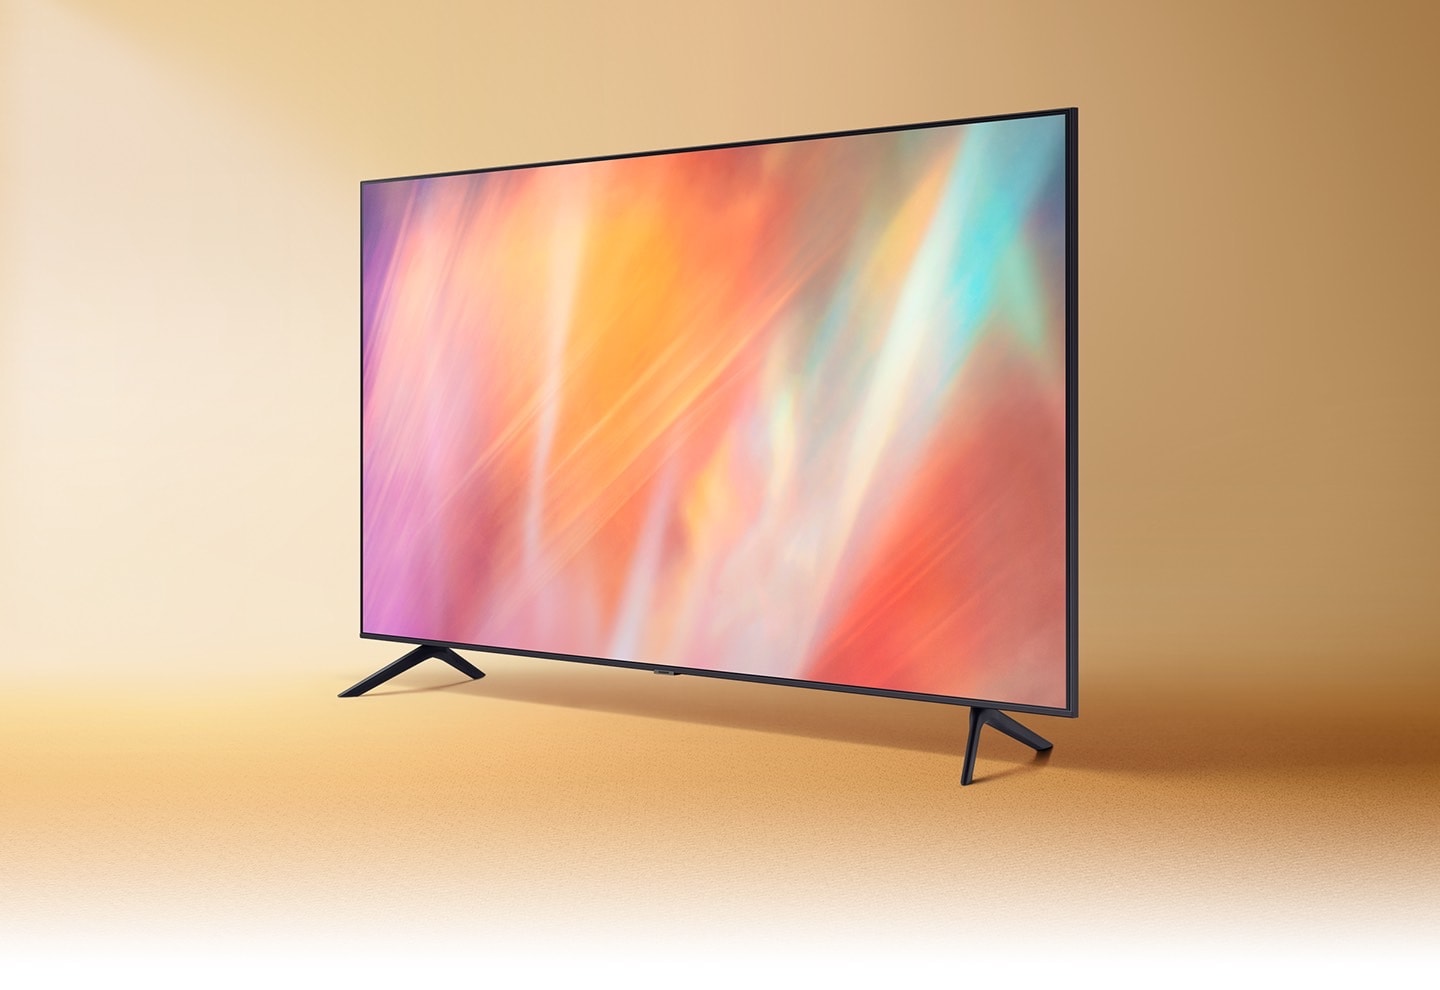 AU7000 displays intricately blended color graphics which demonstrate vivid crystal color.